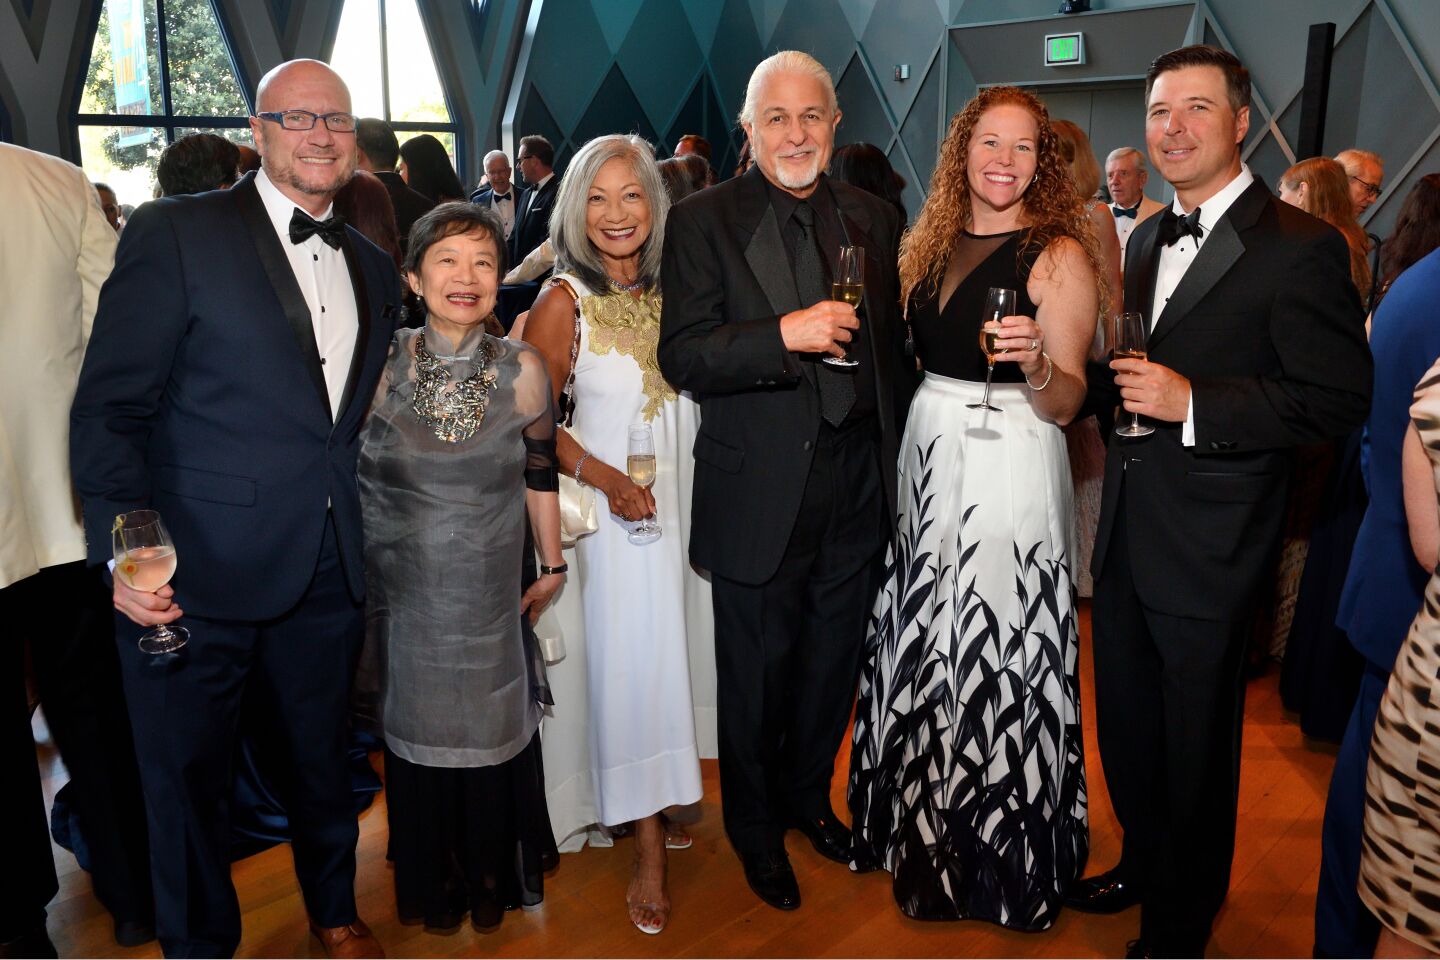 Darin Dietz, Lilly Cheng, Evelyn and Bill Lamden and Lindsey and Stephen Gamp